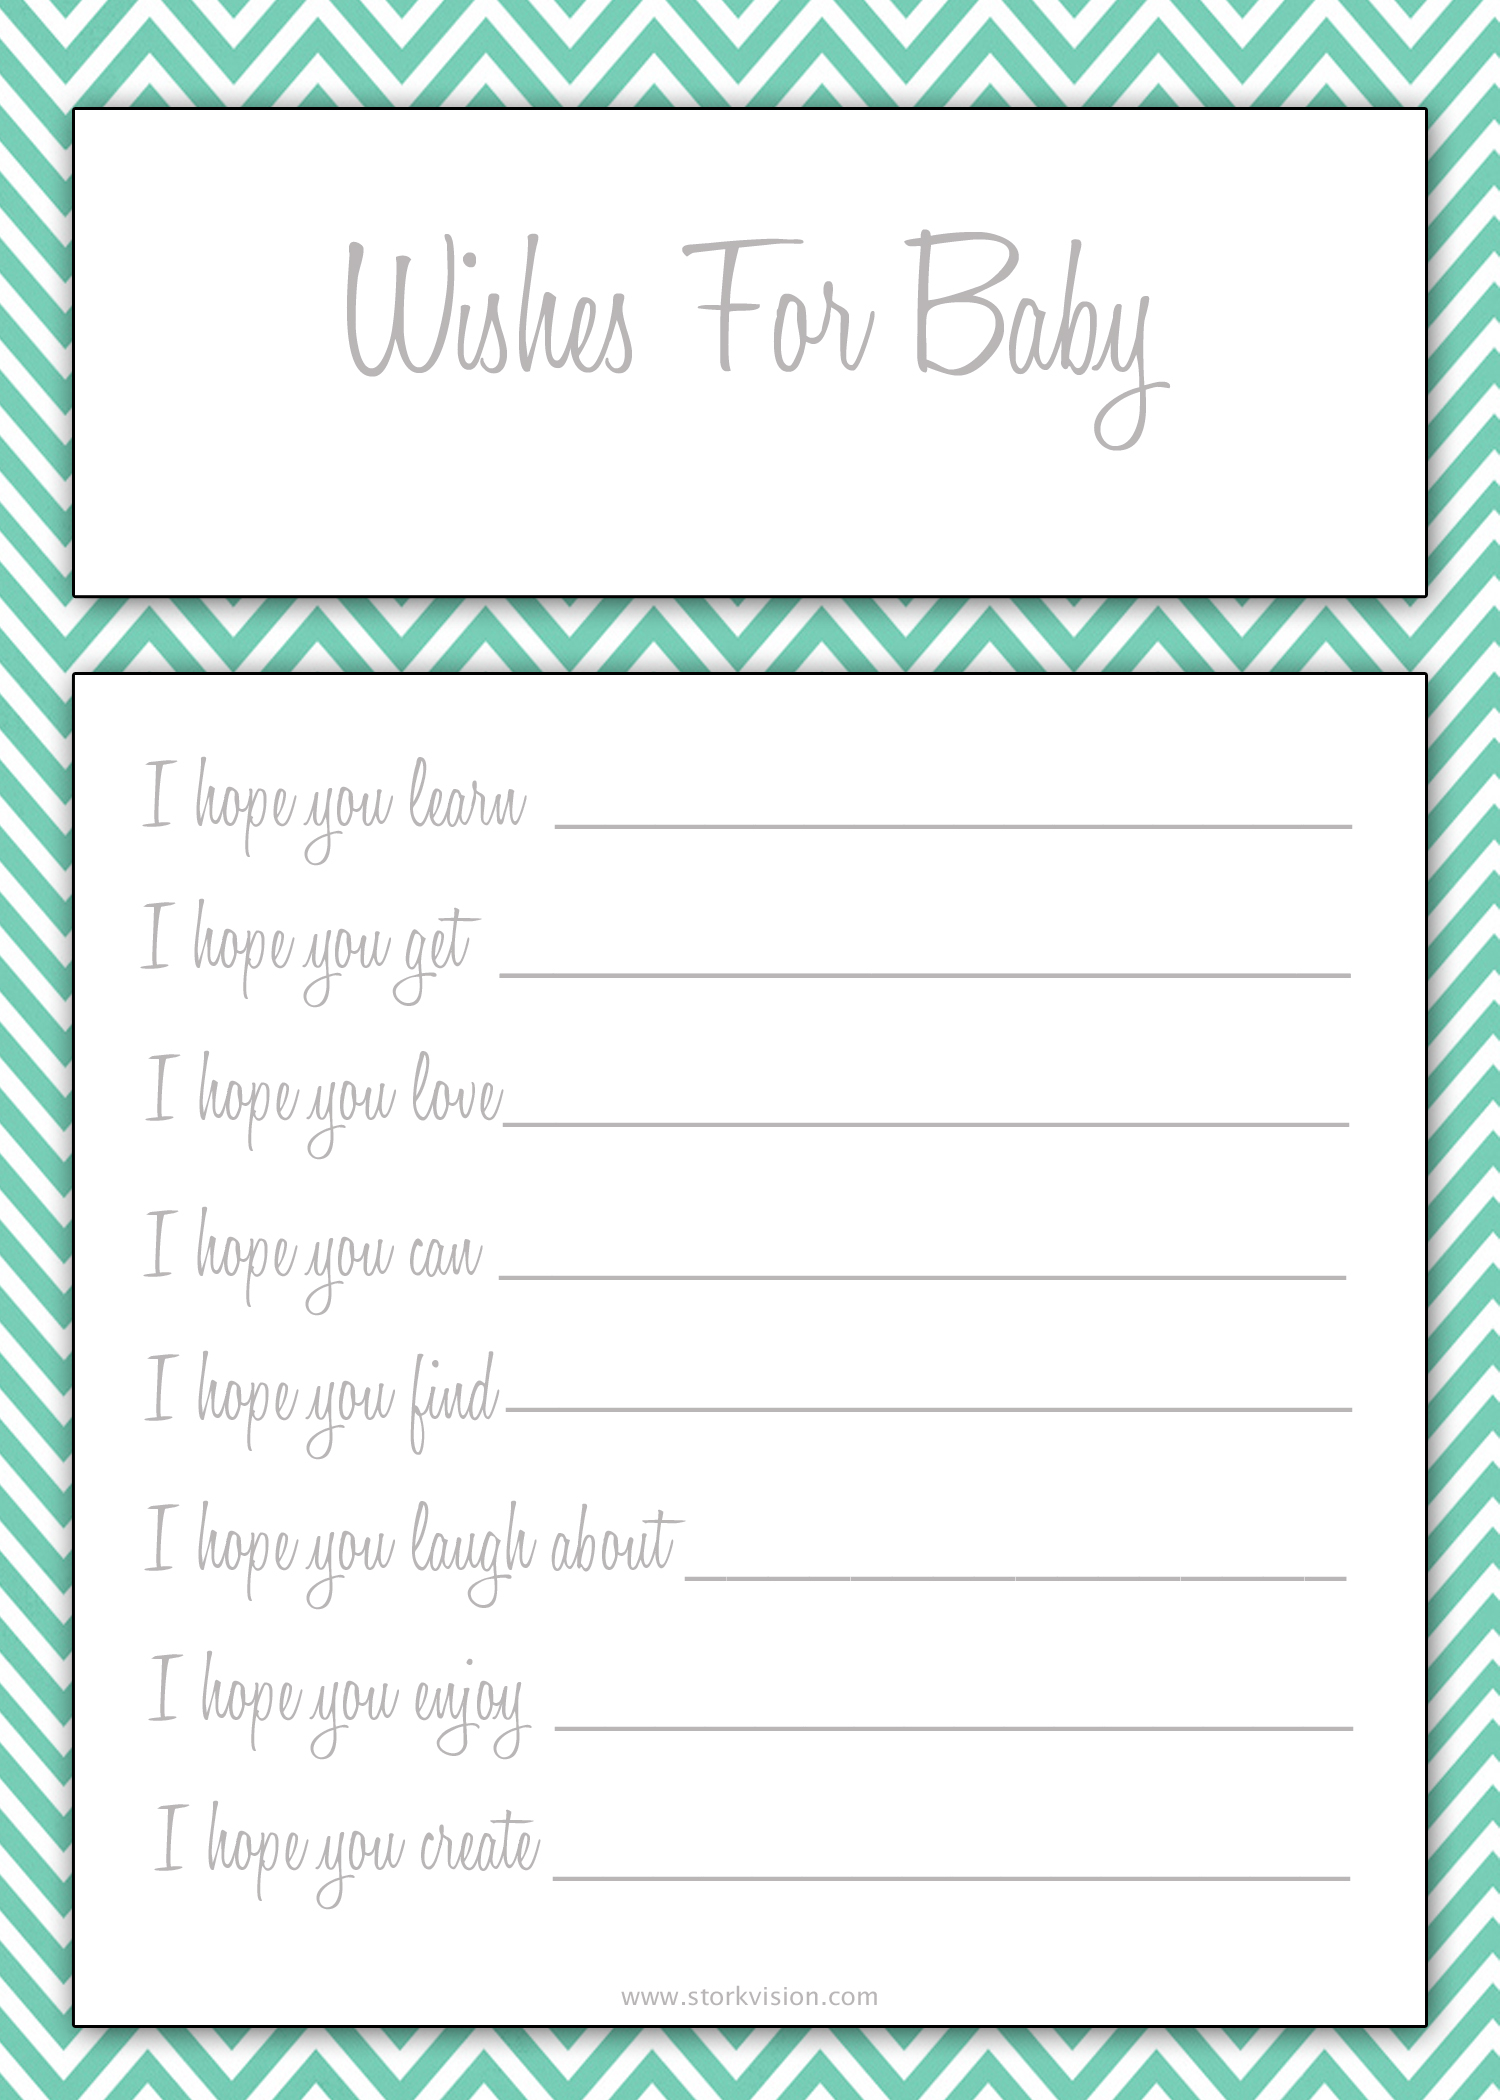 Full Size of Baby Shower:stylish Baby Shower Wishes Picture Inspirations Baby Shower Food Ideas With Baby Shower Gift List Plus Comida Para Baby Shower Together With Baby Shower Registry